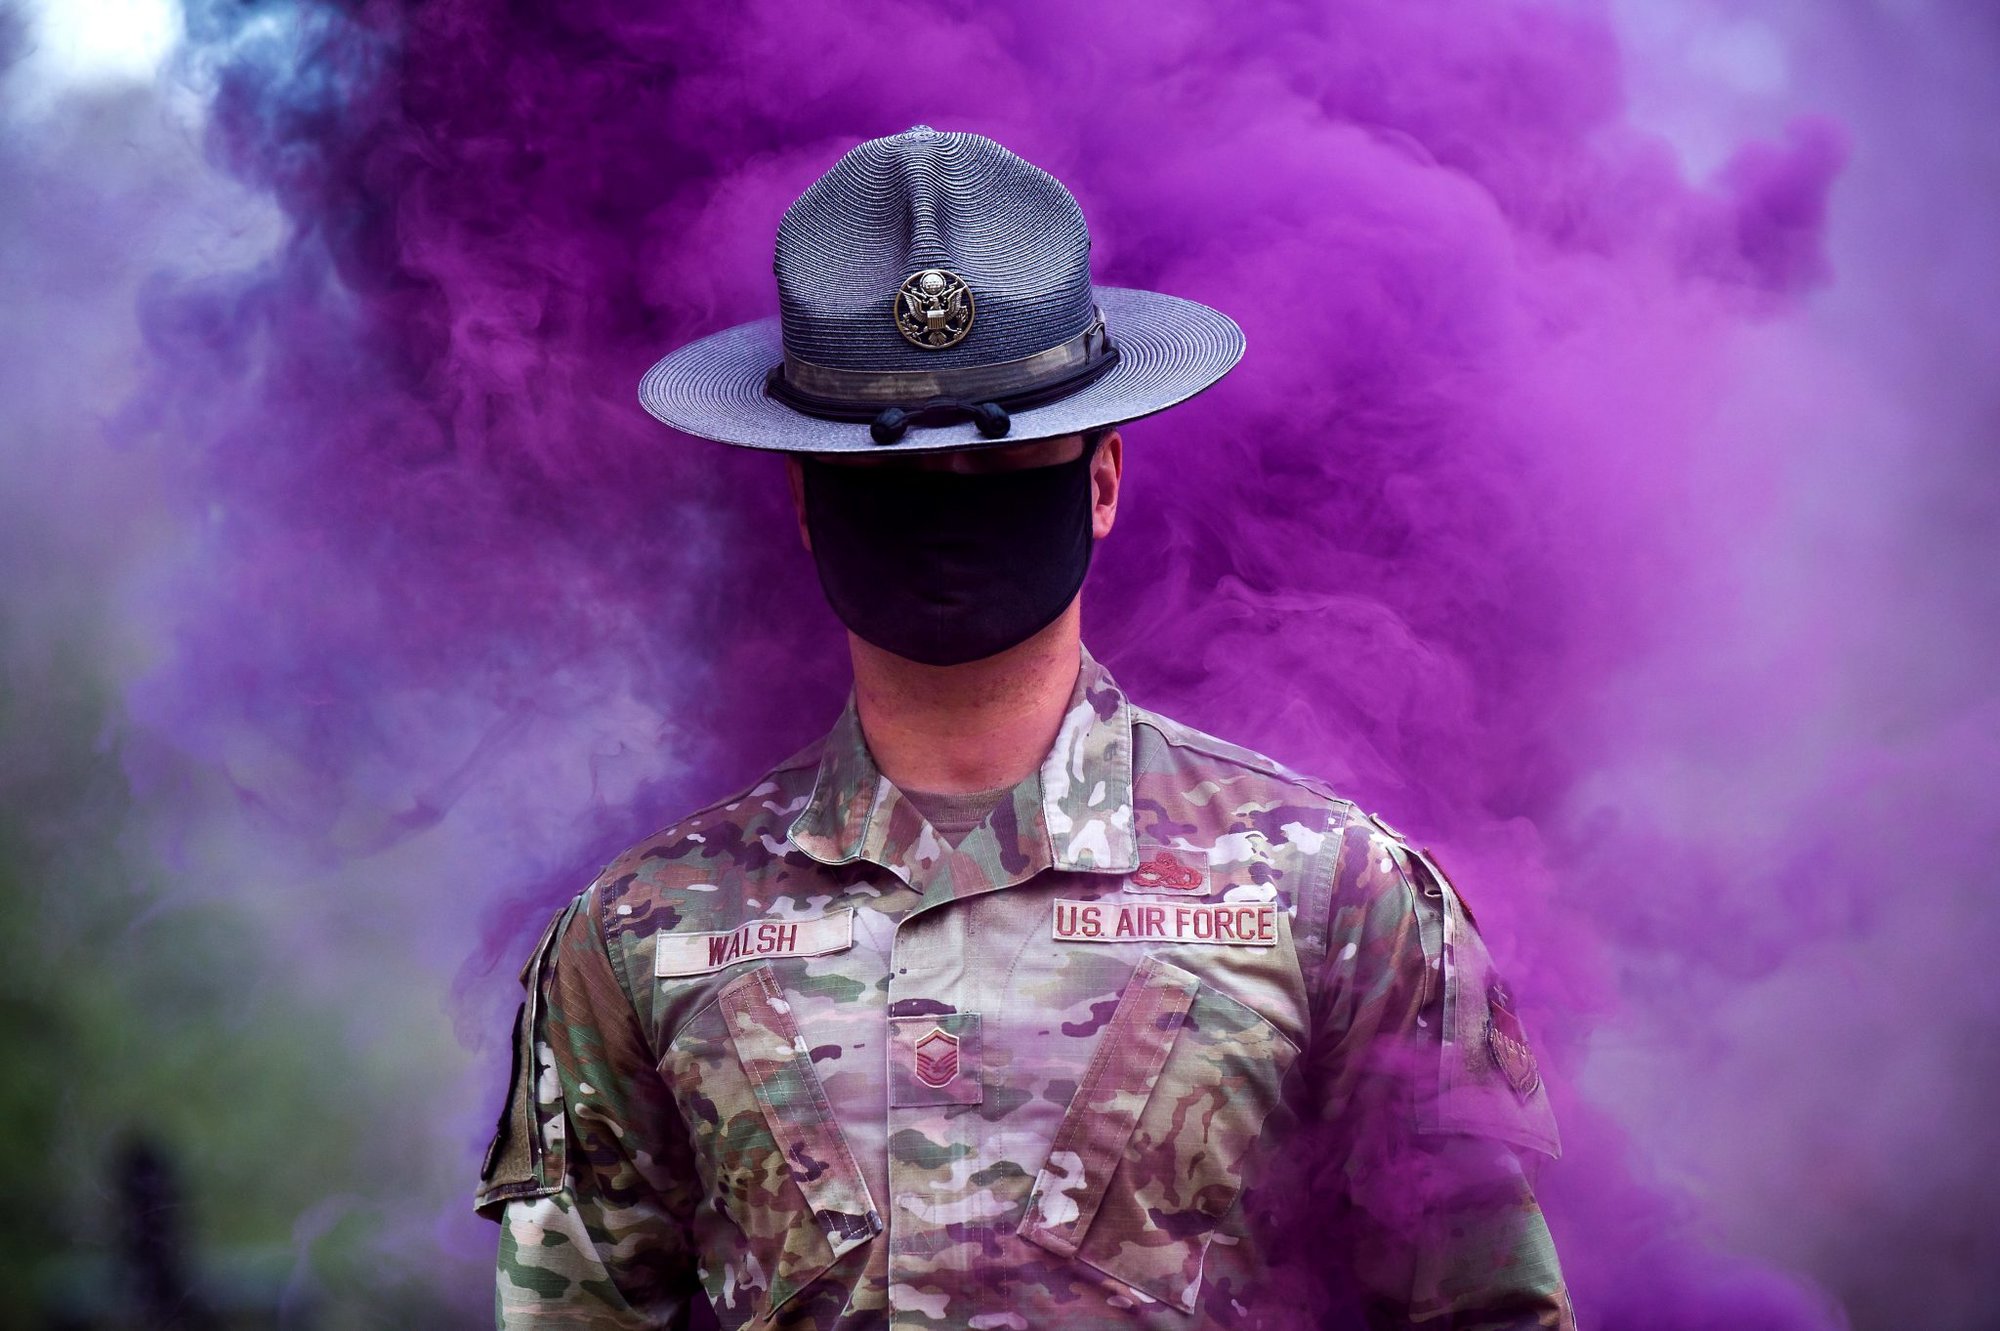 Military Training Instructor Master Sgt. Michael Walsh walks through purple smoke in the Basic Cadet Training assault course at the US Air Force Academy’s Jacks Valley in Colorado Springs, Colorado, July 13, 2021. US Air Force photo by Trevor Cokley, courtesy of DVIDS.